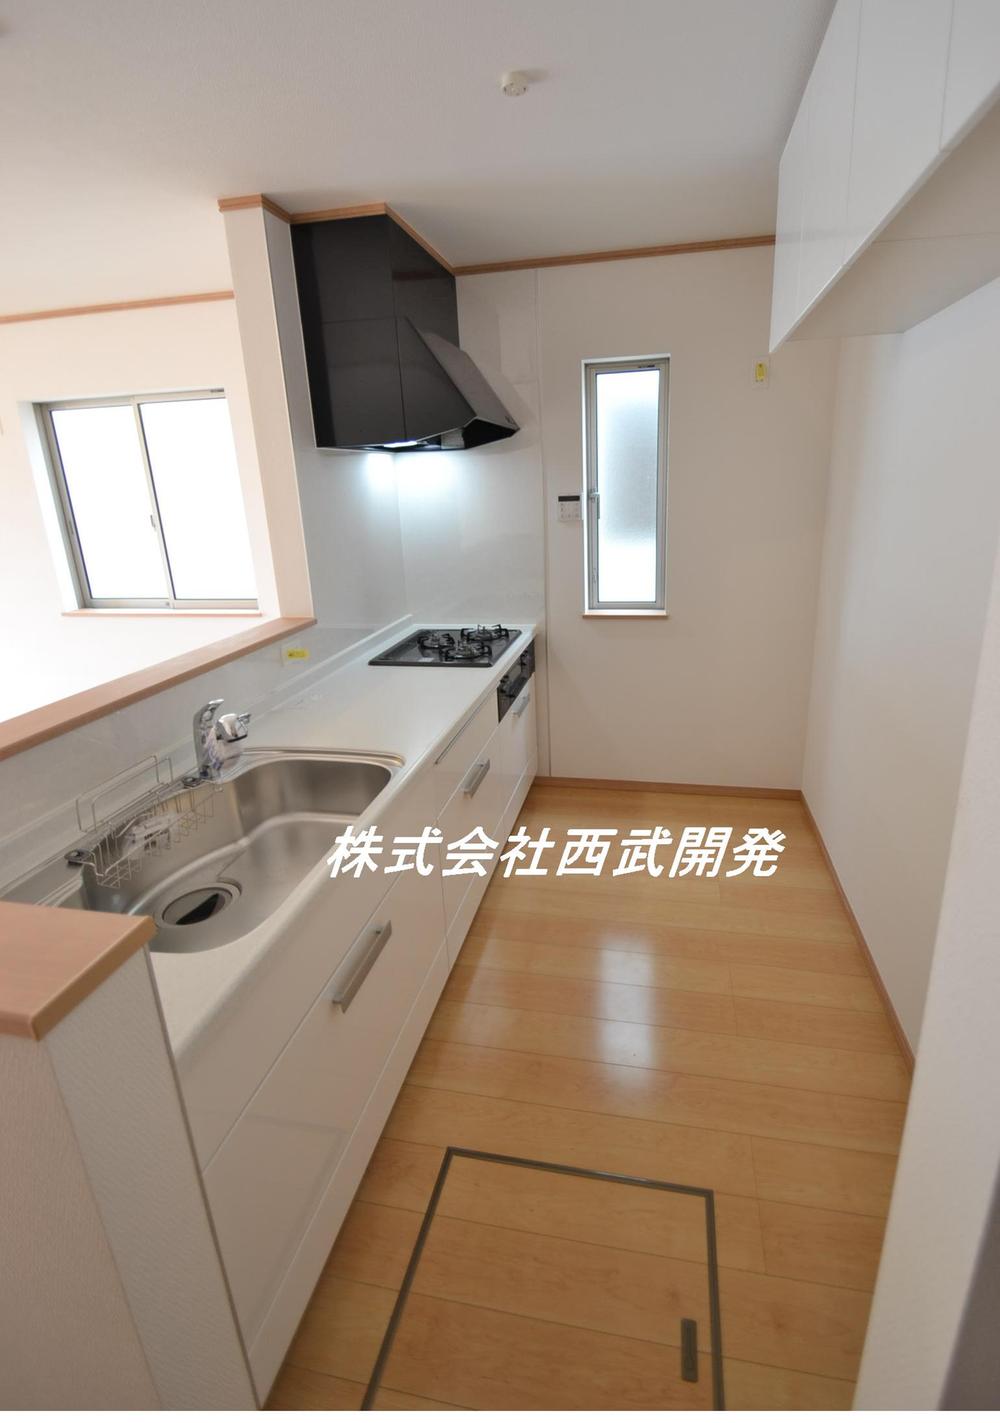 Same specifications photo (kitchen). CD Building same specification kitchen